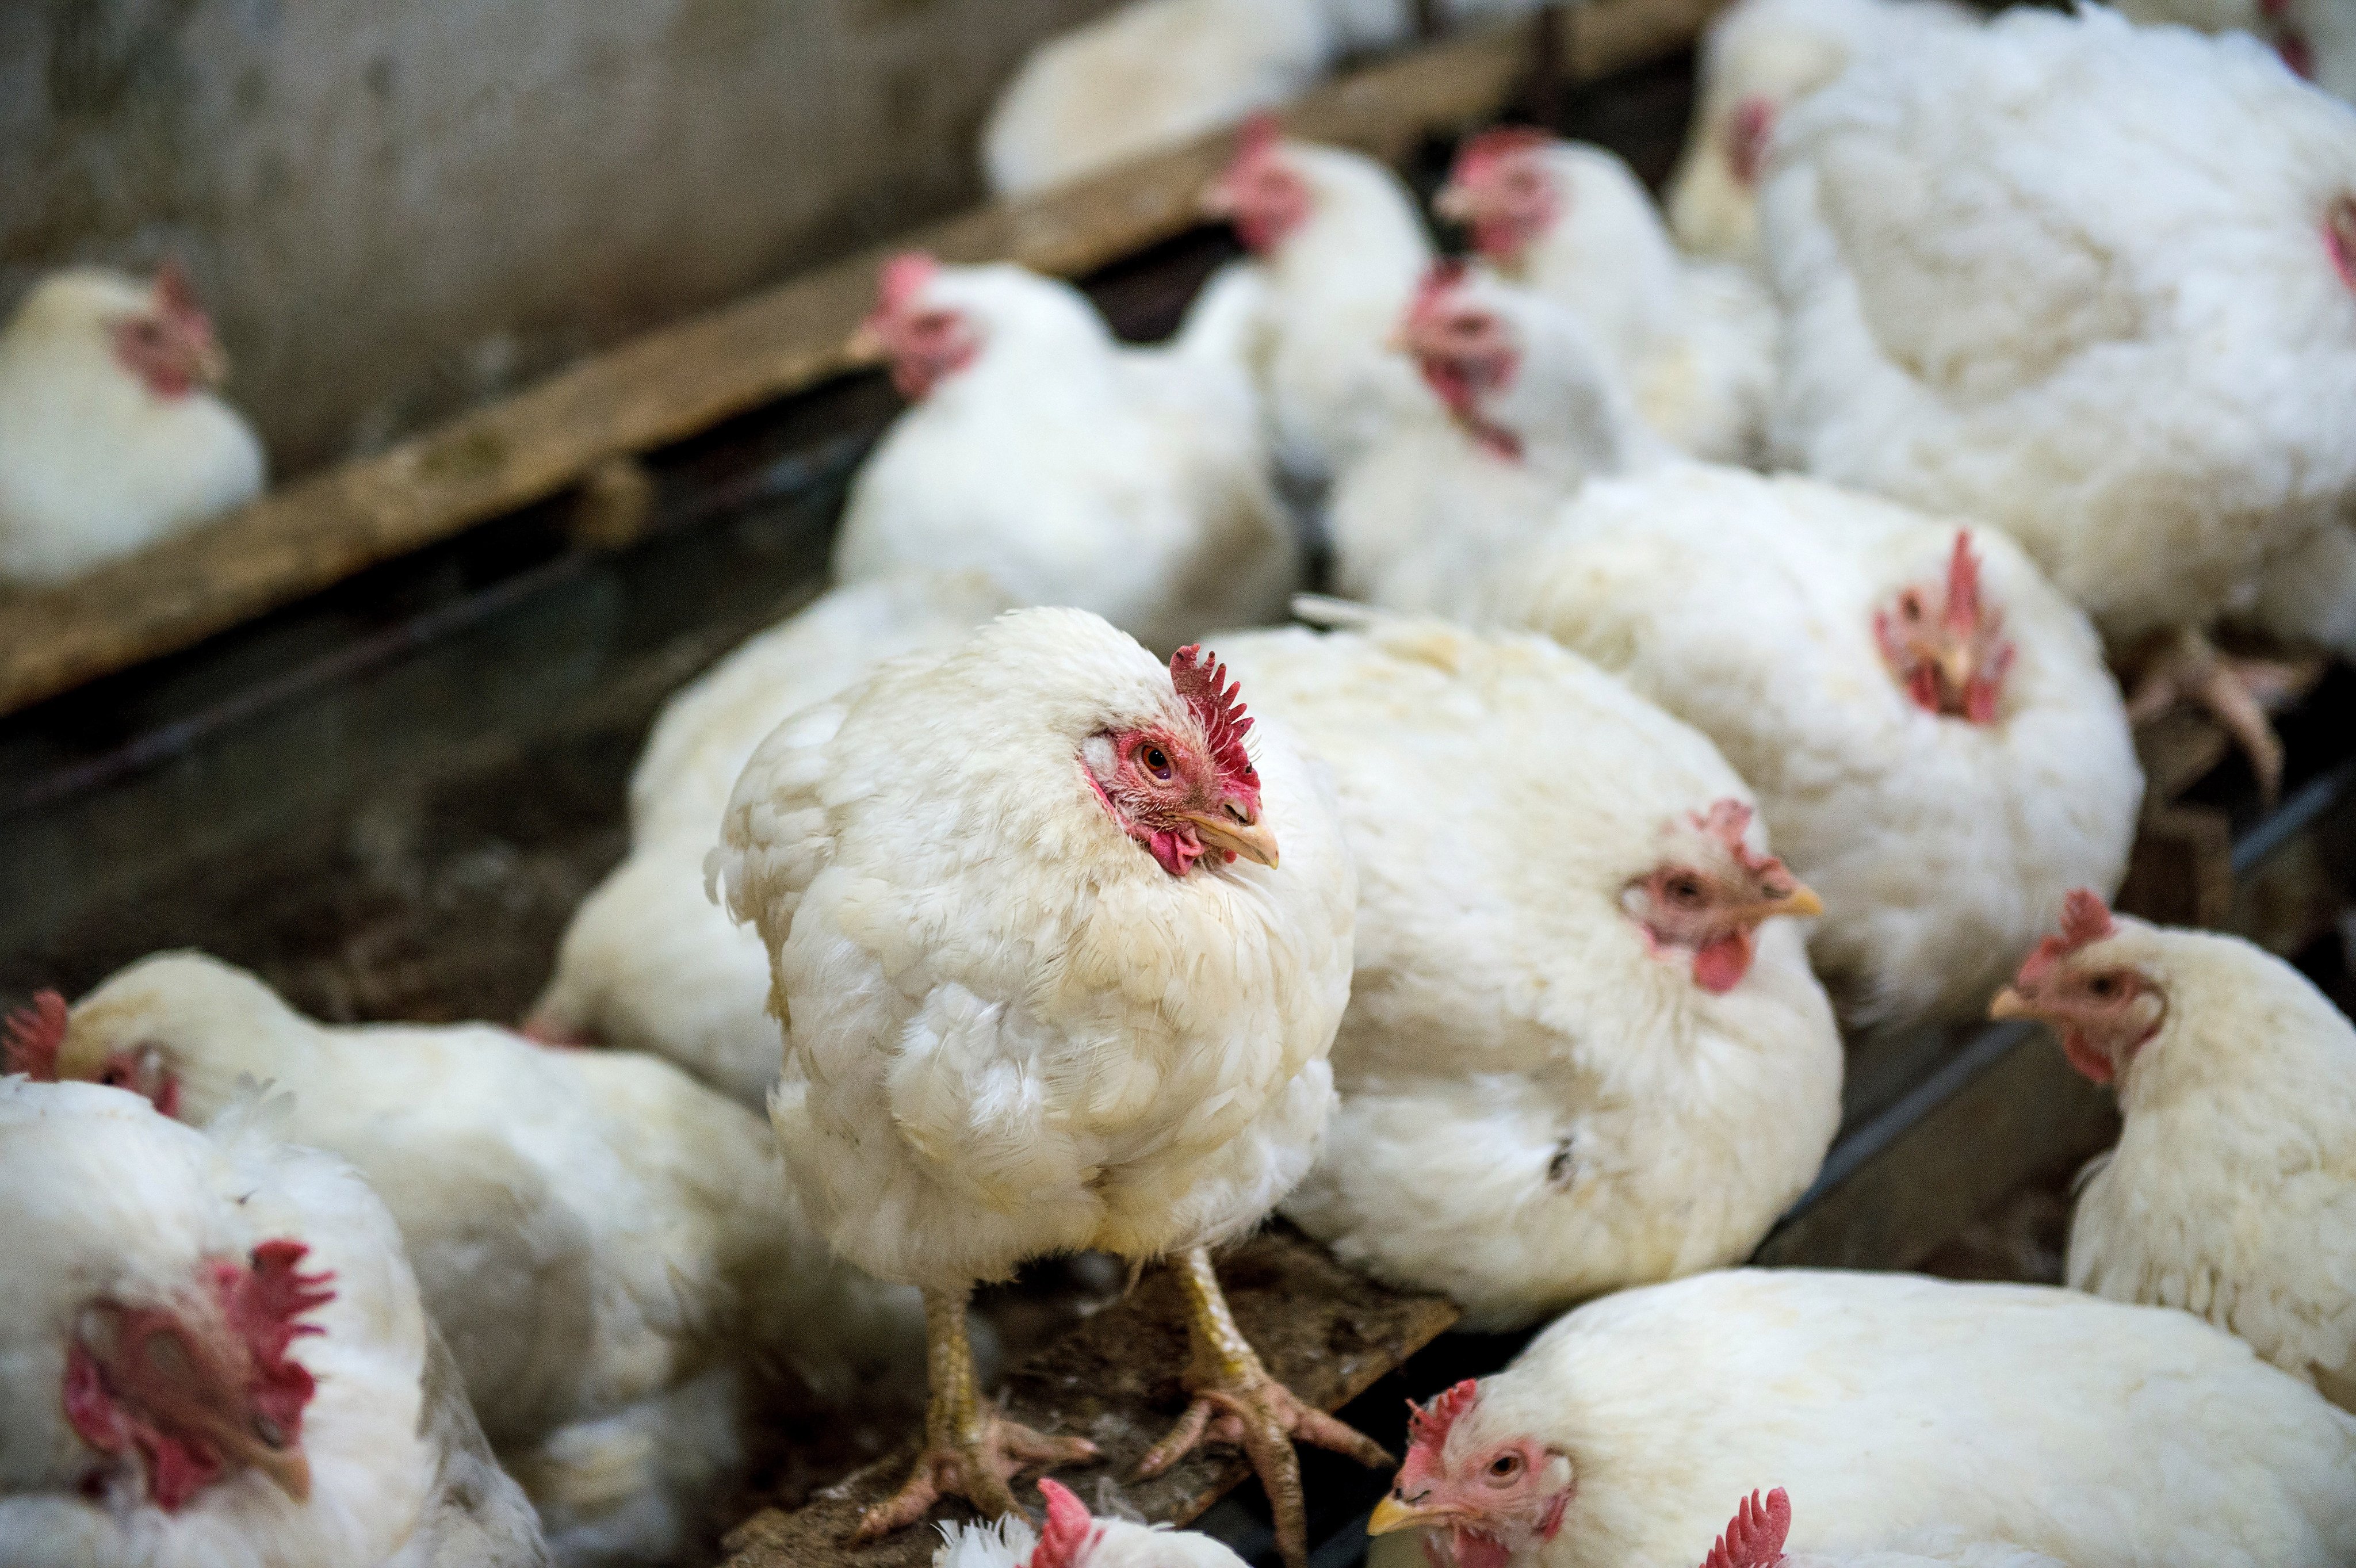 Singapore suspends poultry imports from parts of Japan, US over bird flu fears. Photo: Shutterstock